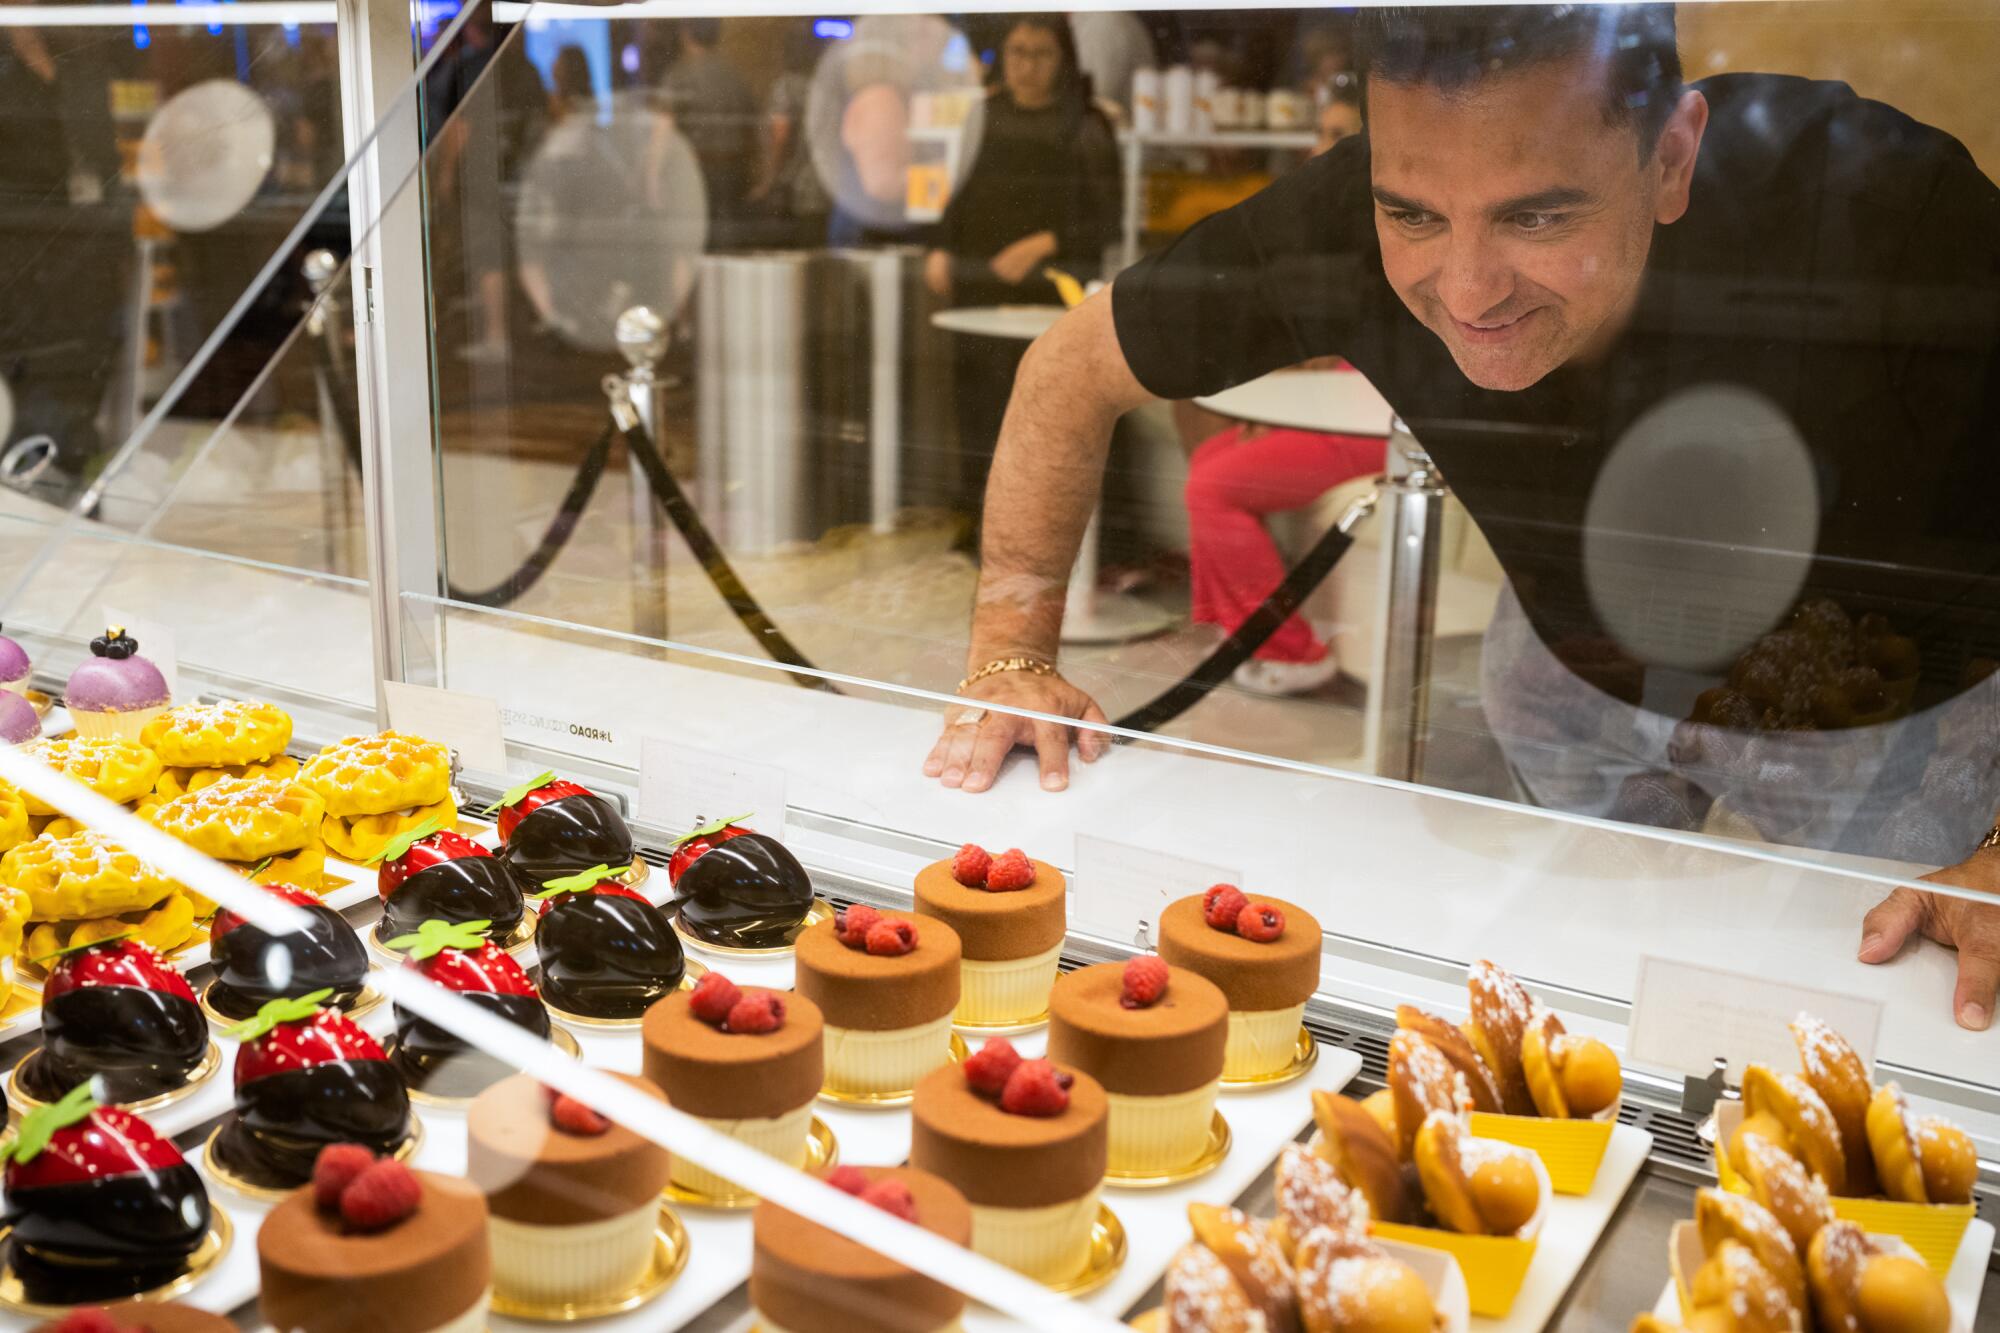 Buddy Valastro gazes at the pastries in the case at Dominique Ansel in Caesars Palace.